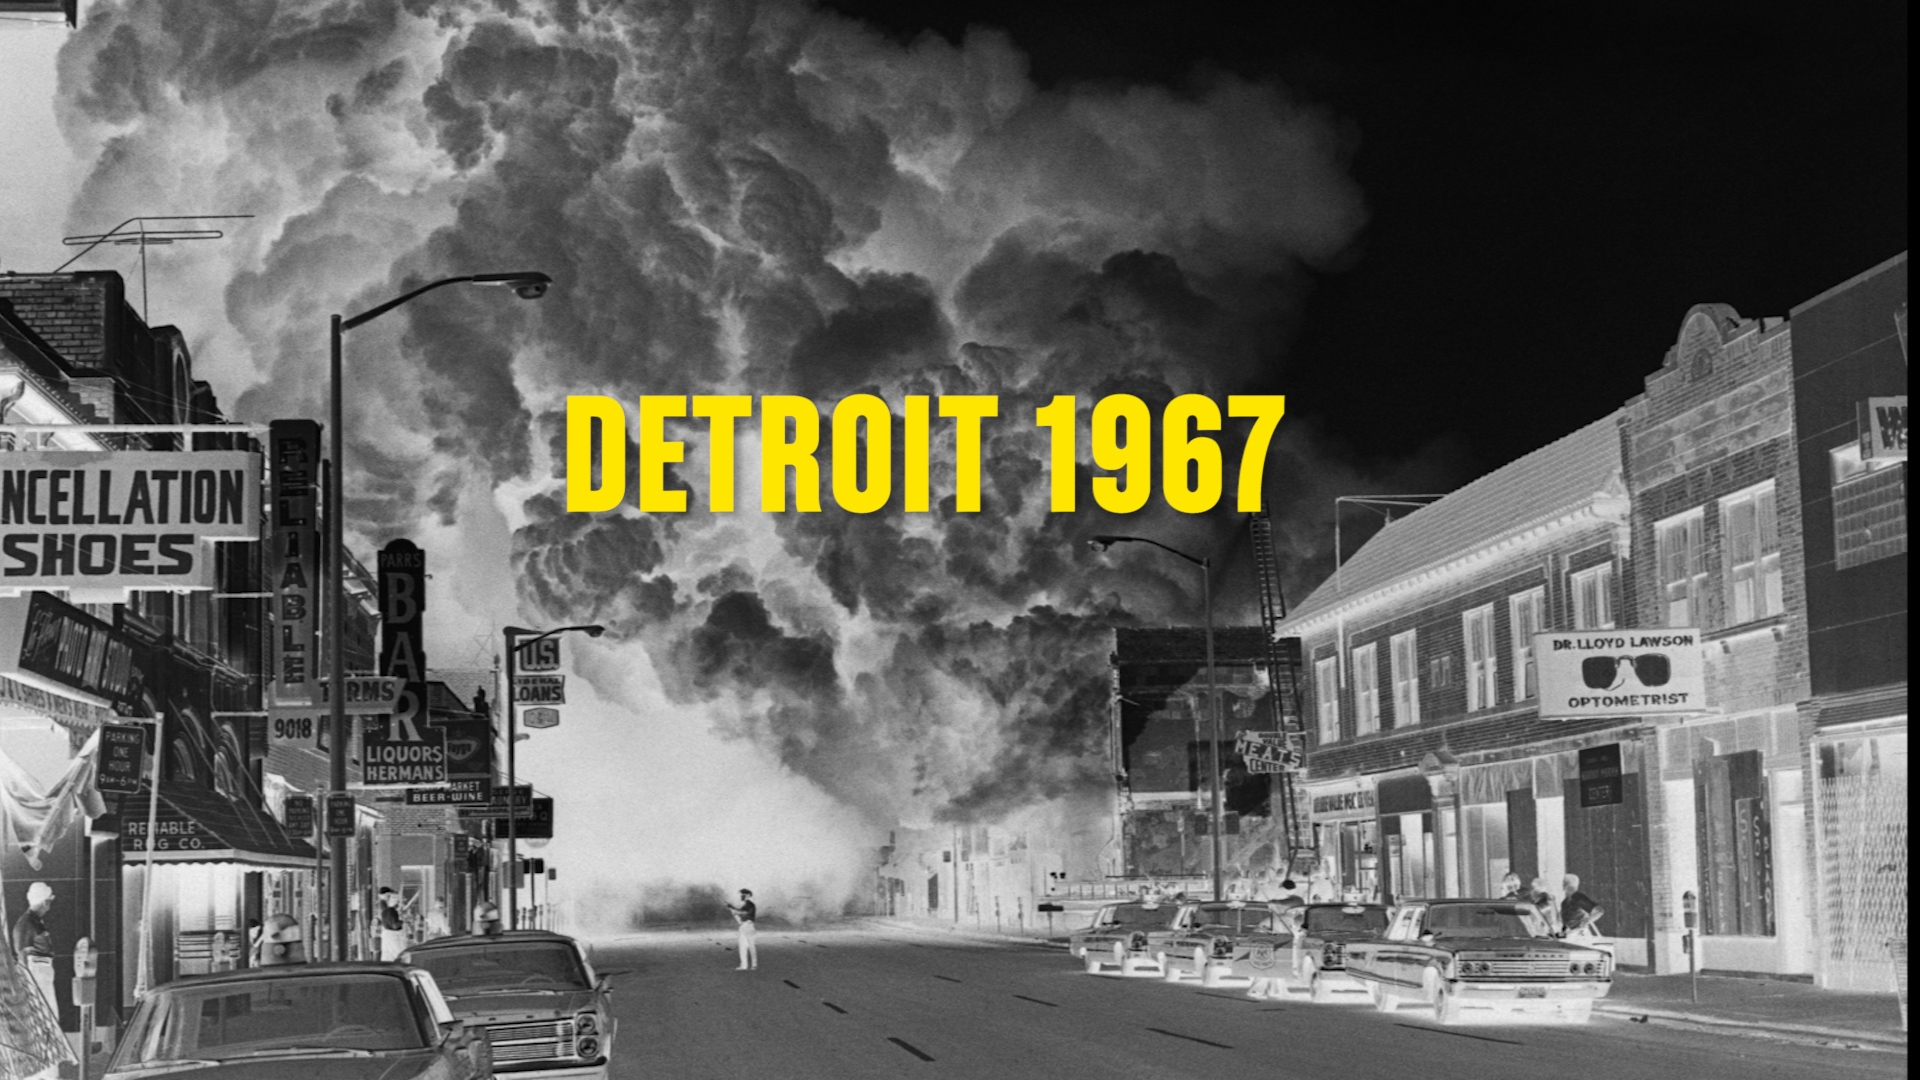 The untold stories of women in the 1967 Detroit rebellion and its